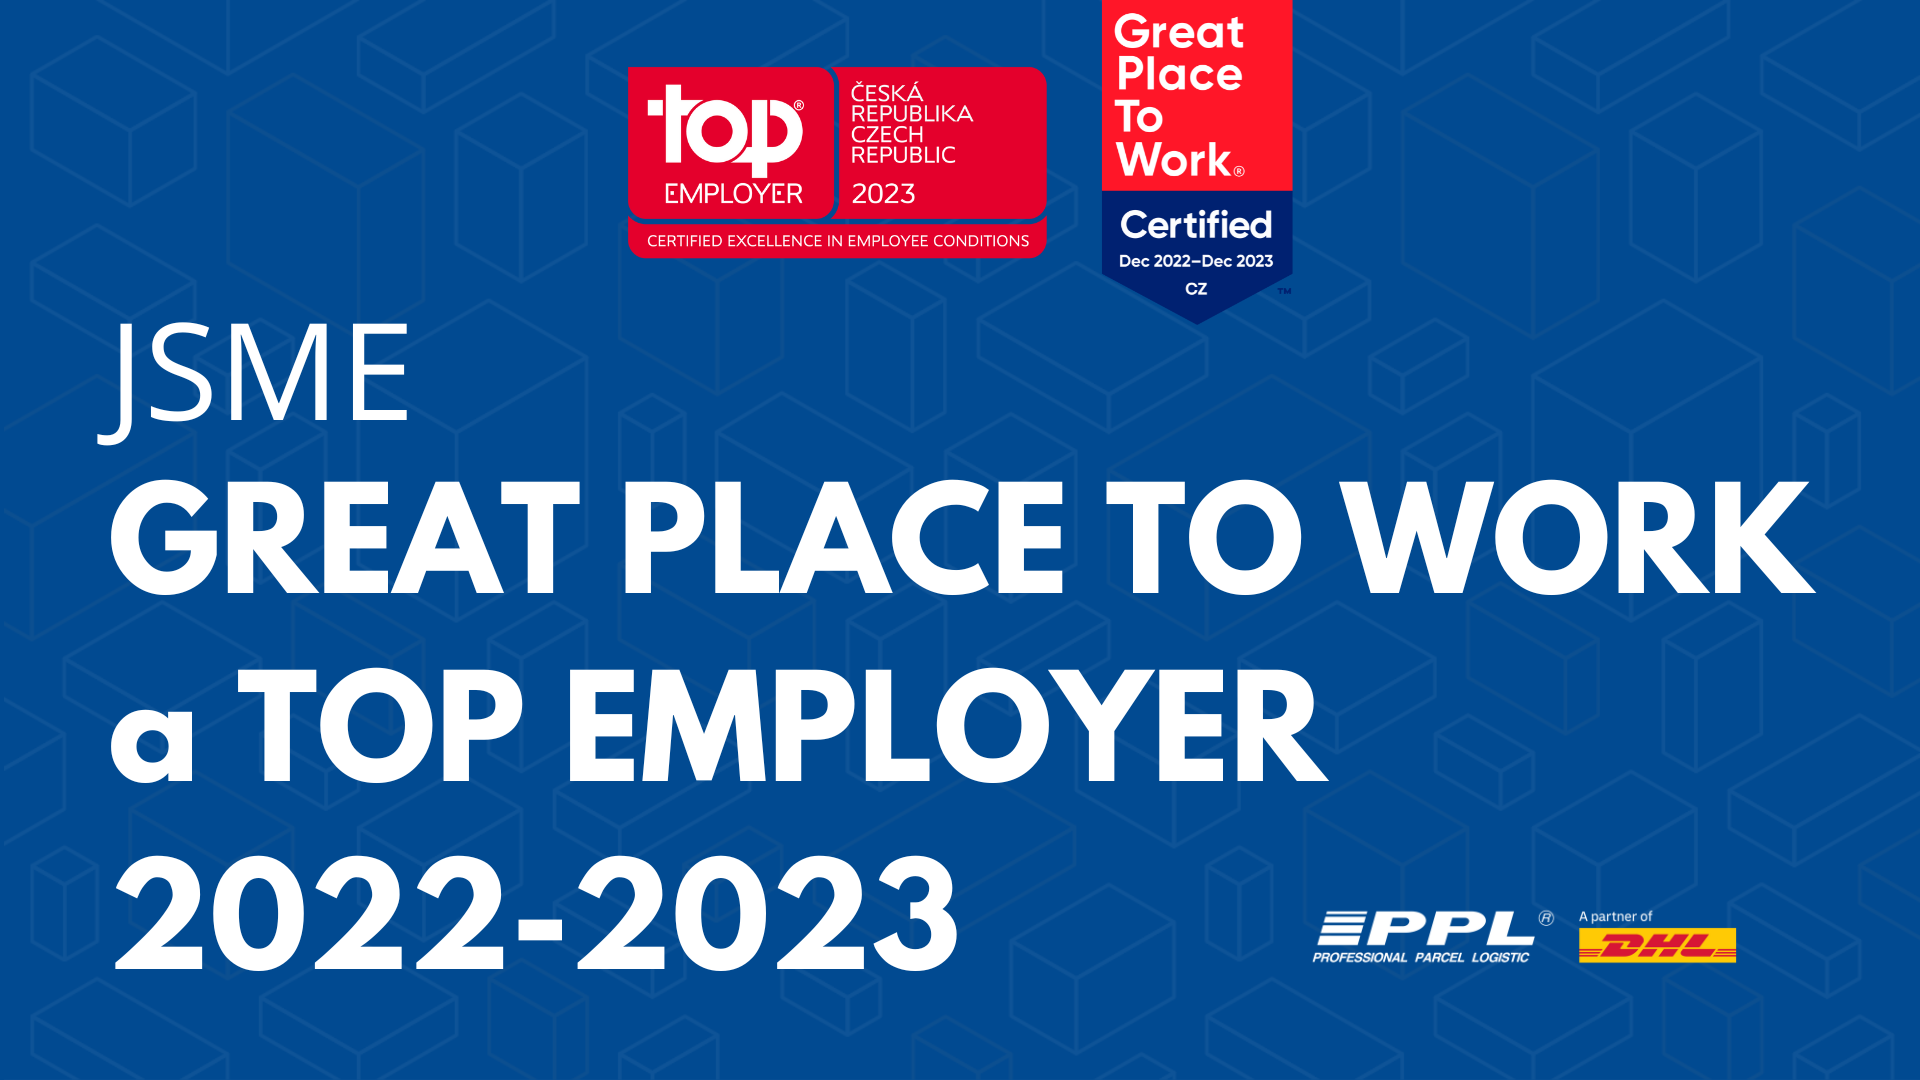 GPTW a TOP EMPLOYER